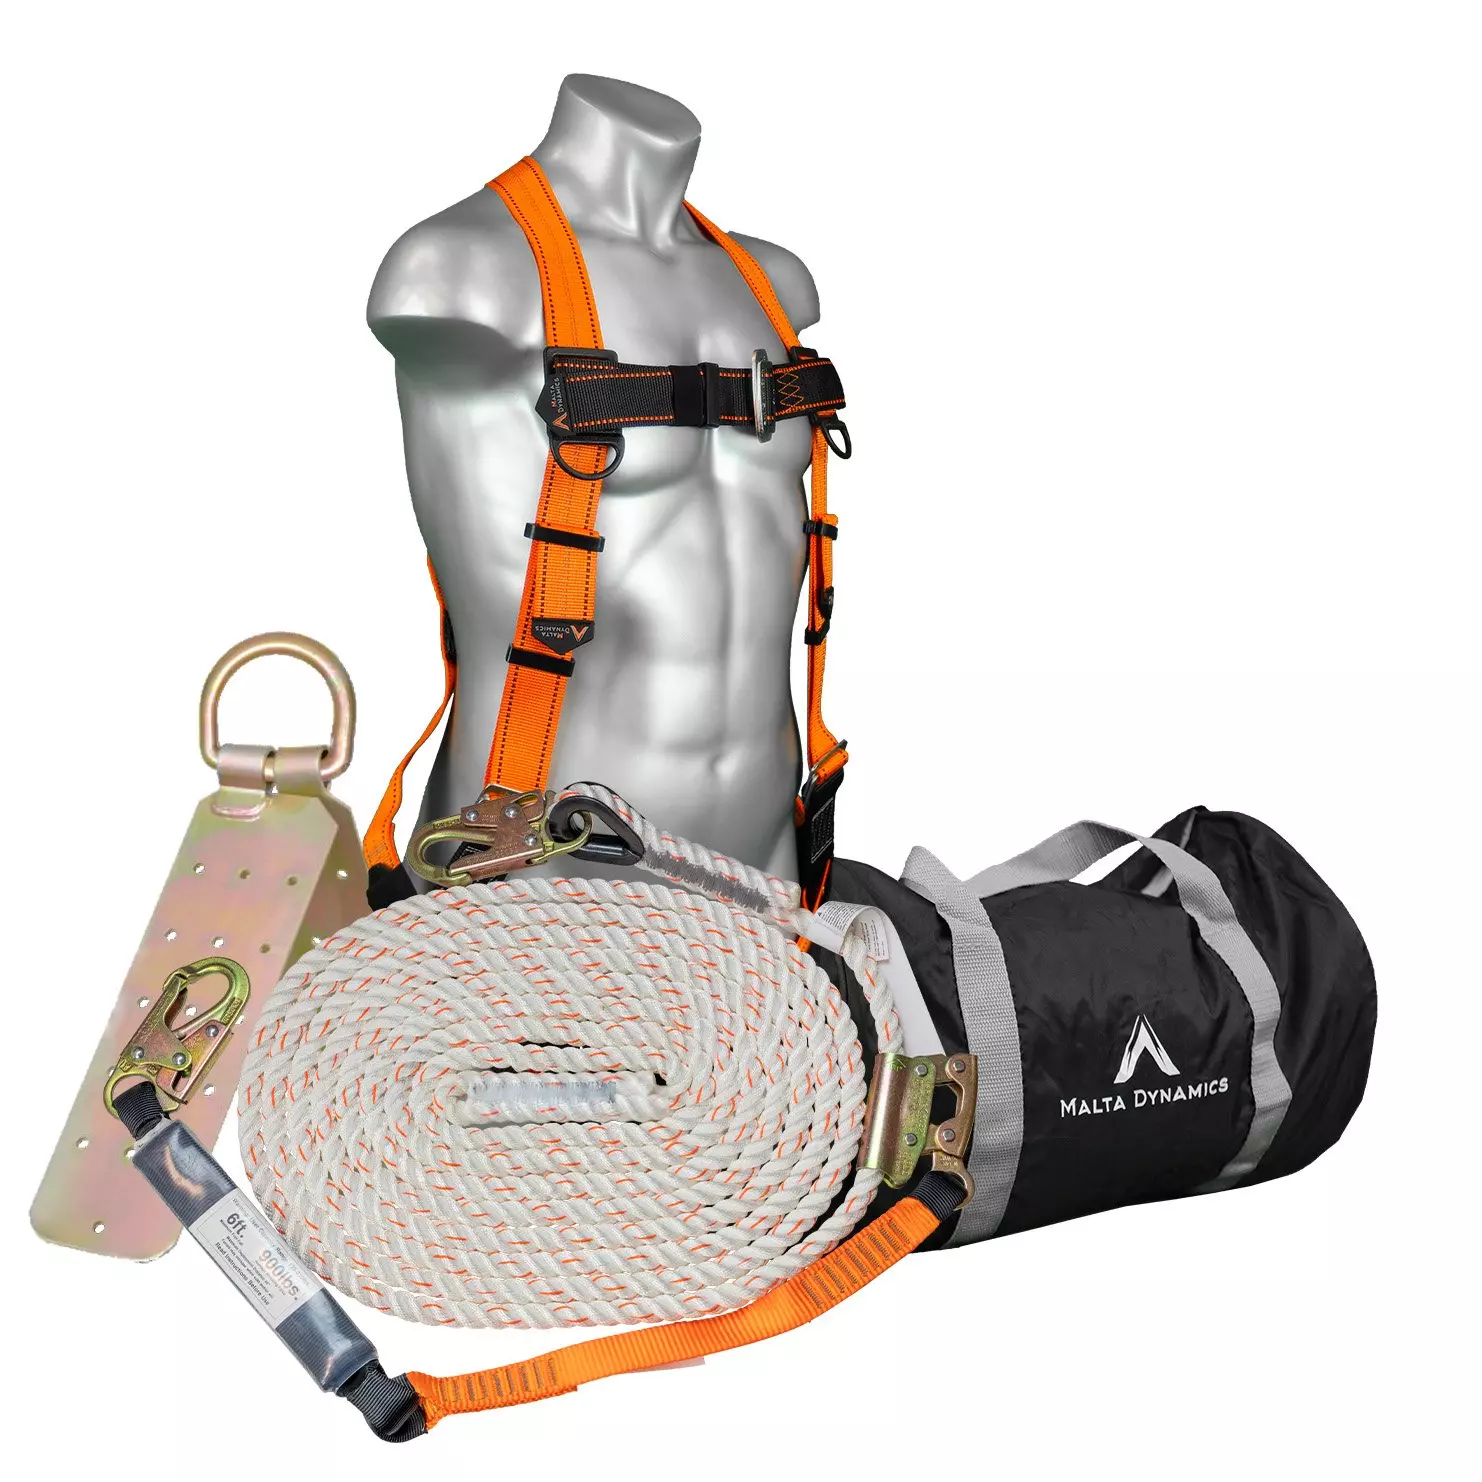 Build Your Own Personal Fall Arrest Systems & PFAS Kits